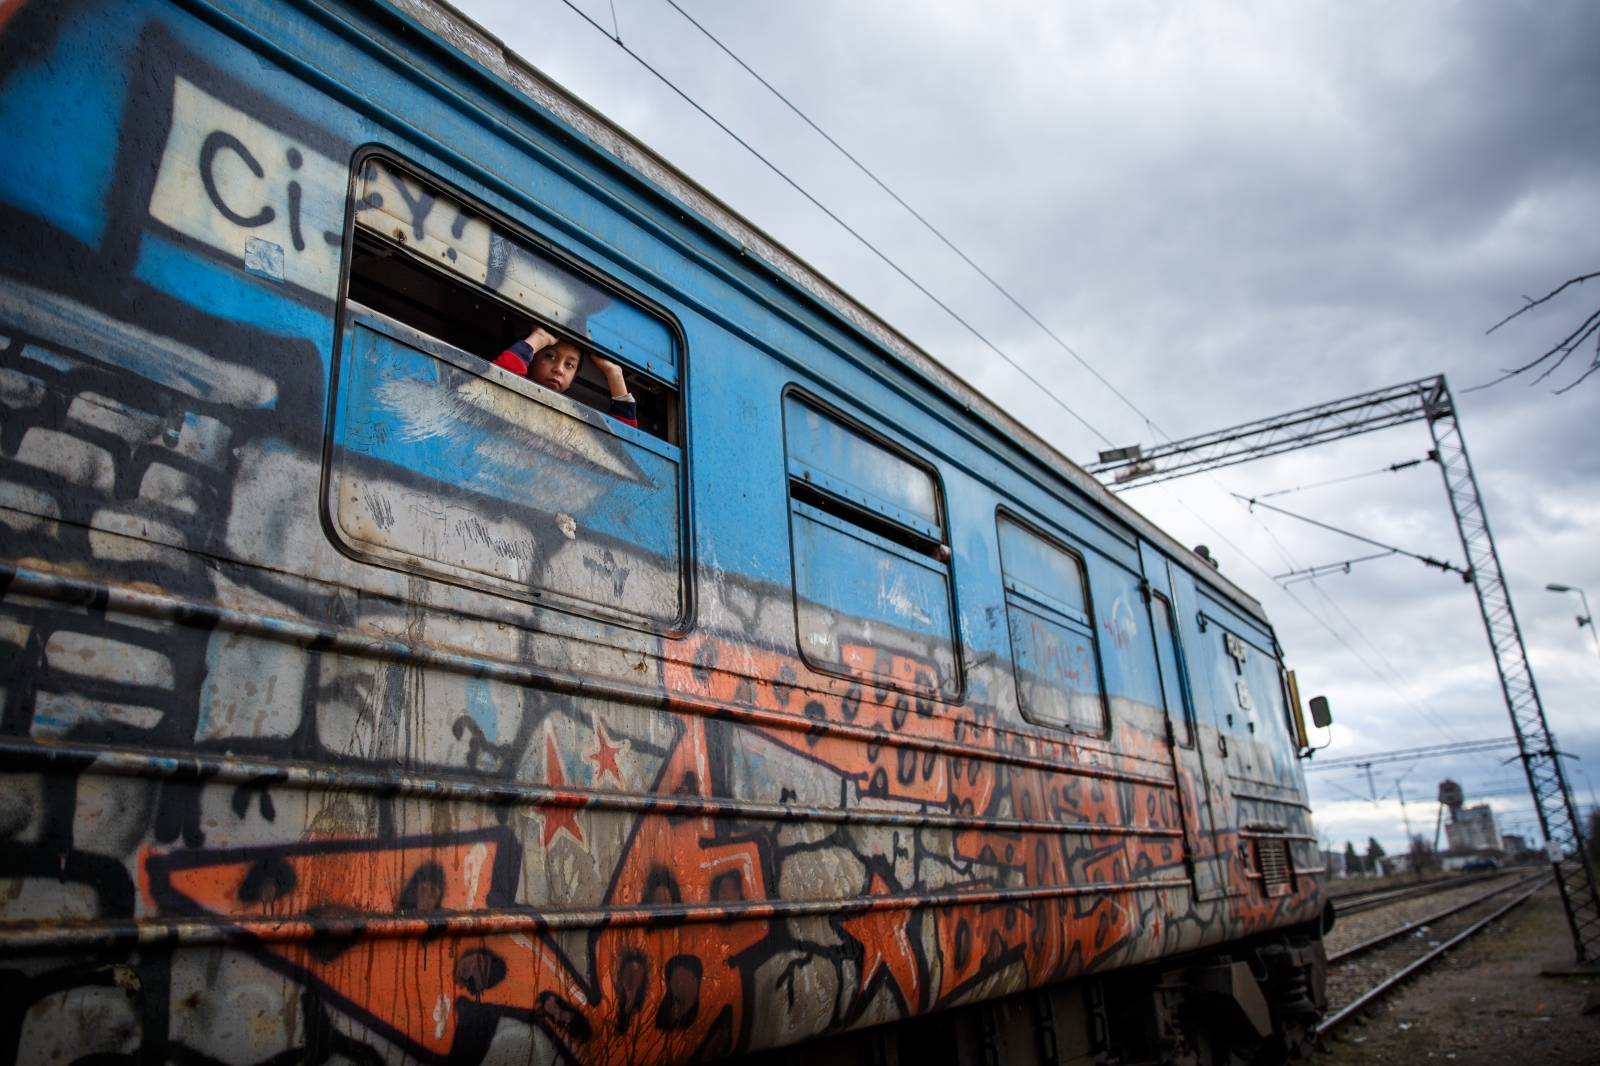  A young refugee peaks out his window as the train departs Presevo, Serbia for the Croatian-Serbian border, January 2016. 